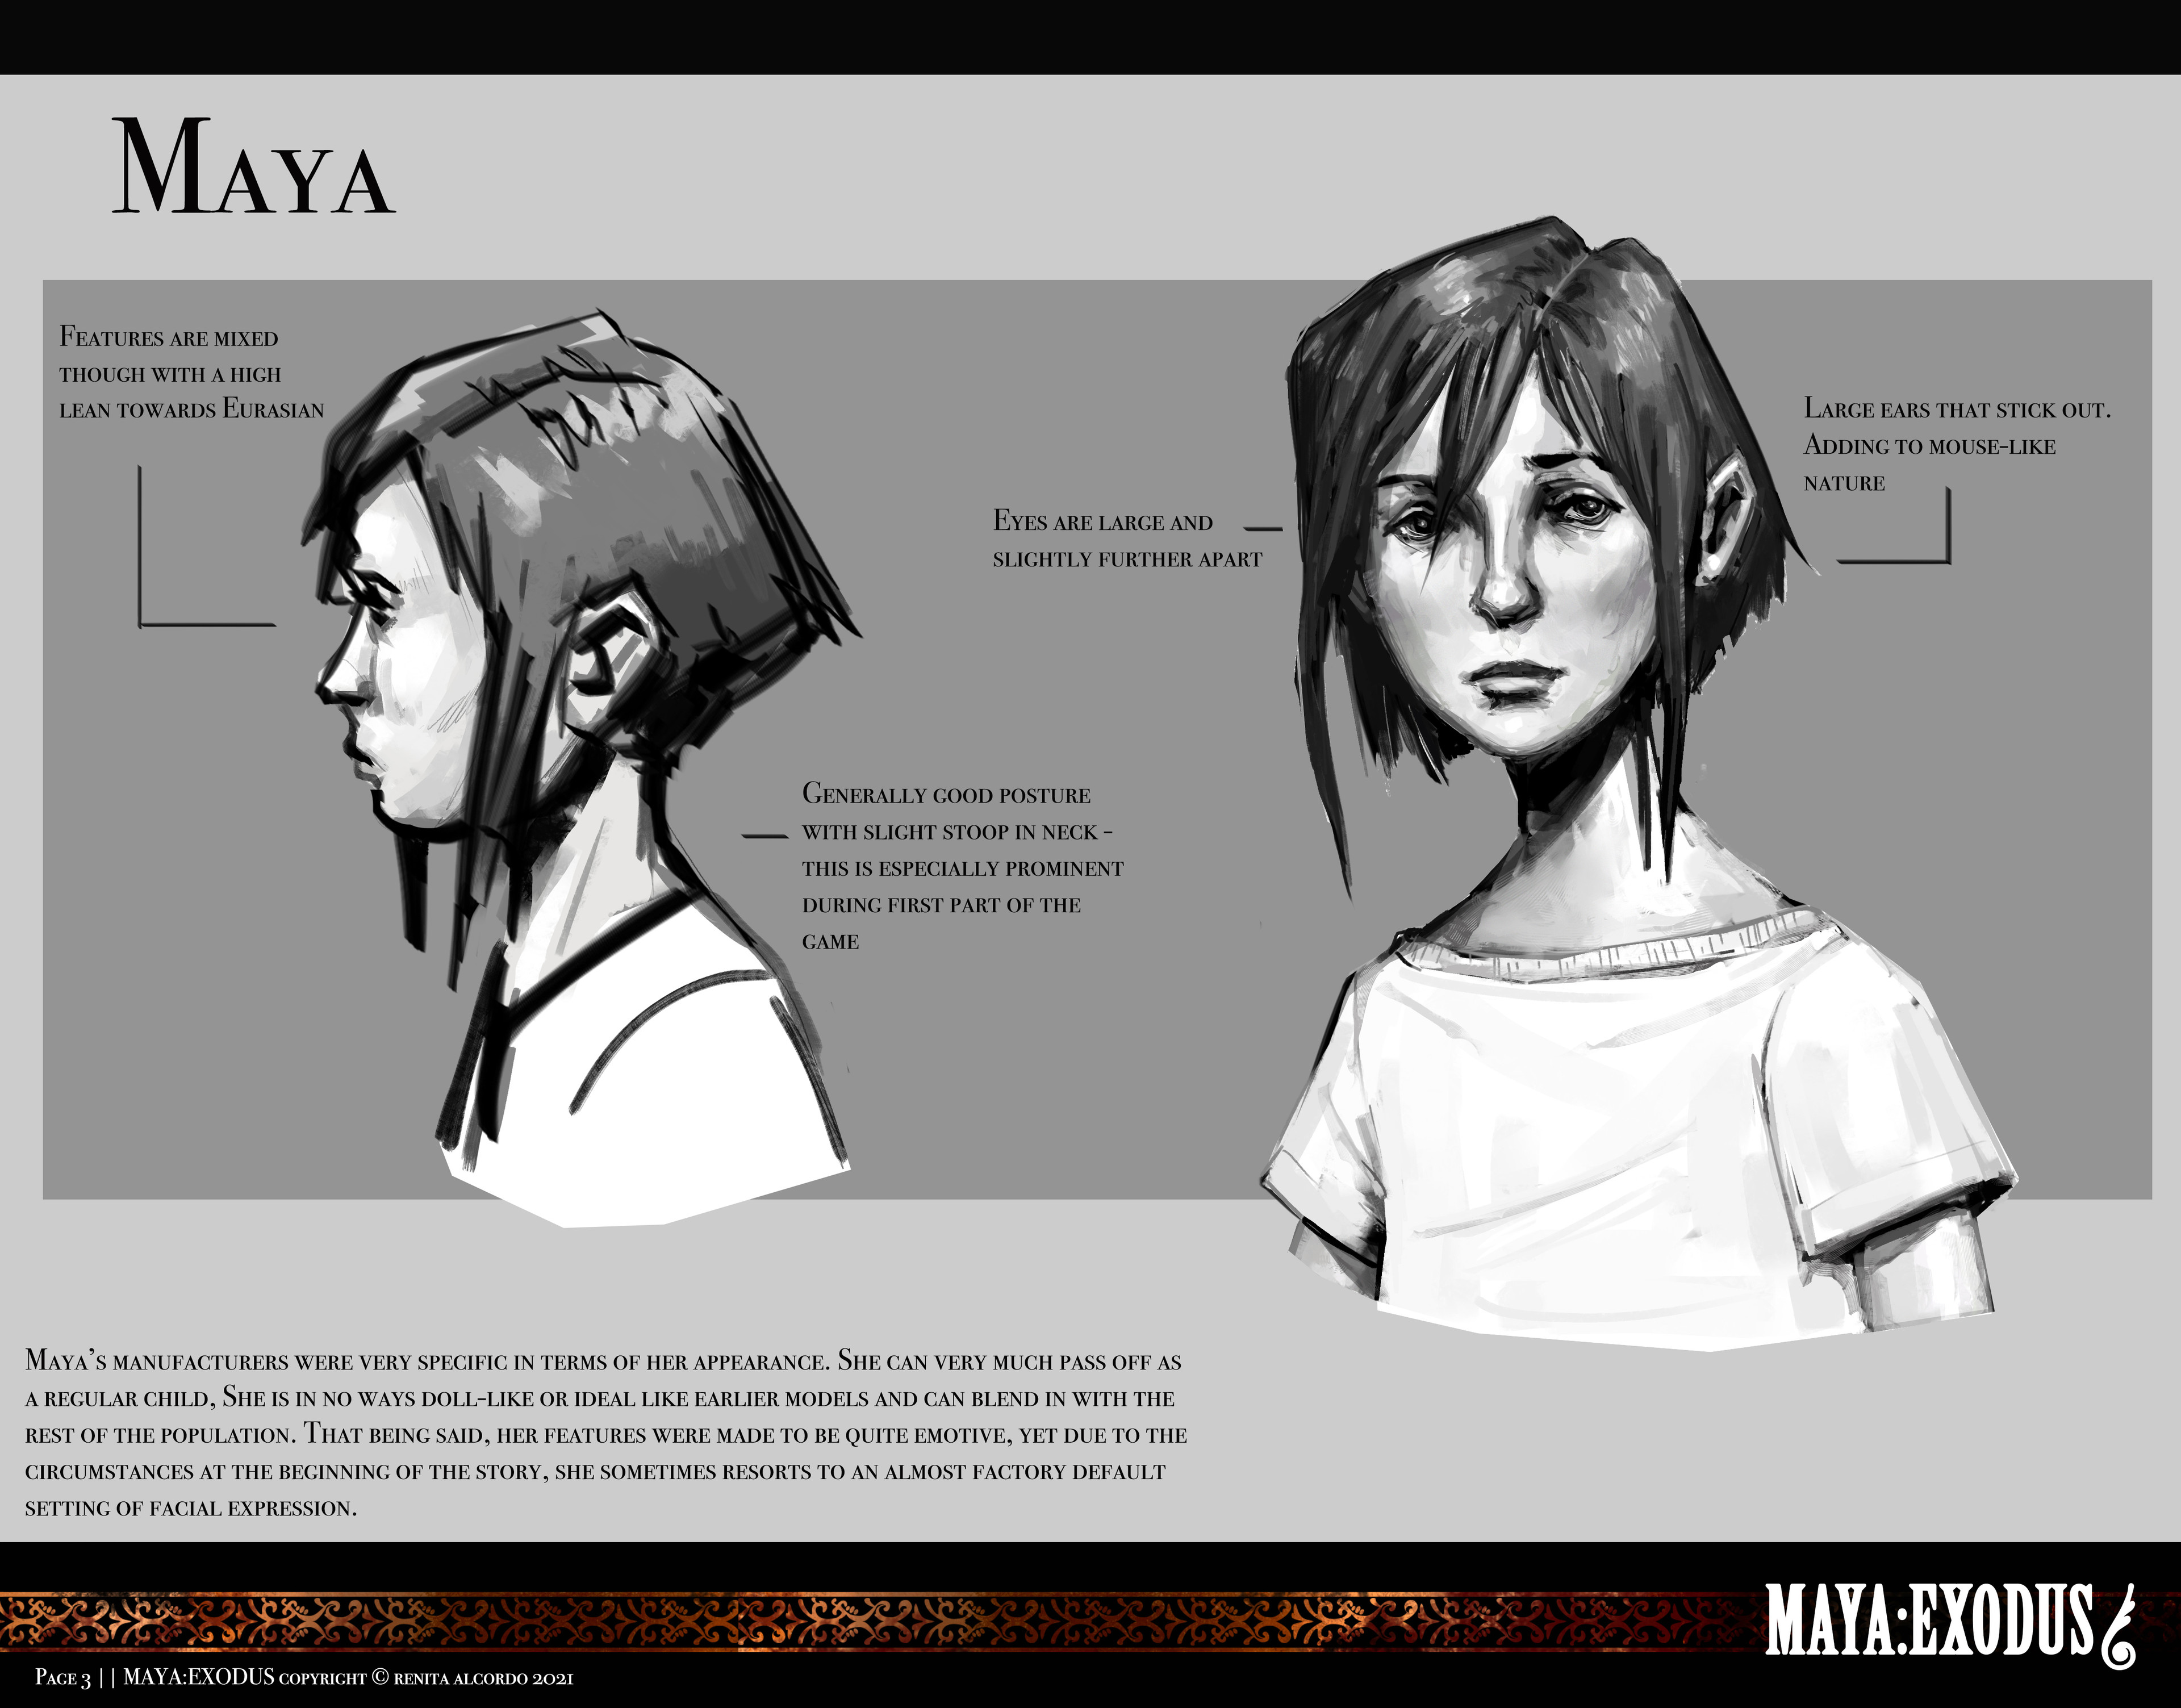 Maya's Haven - Short Story With Comprehension Questions by LearnifyHub